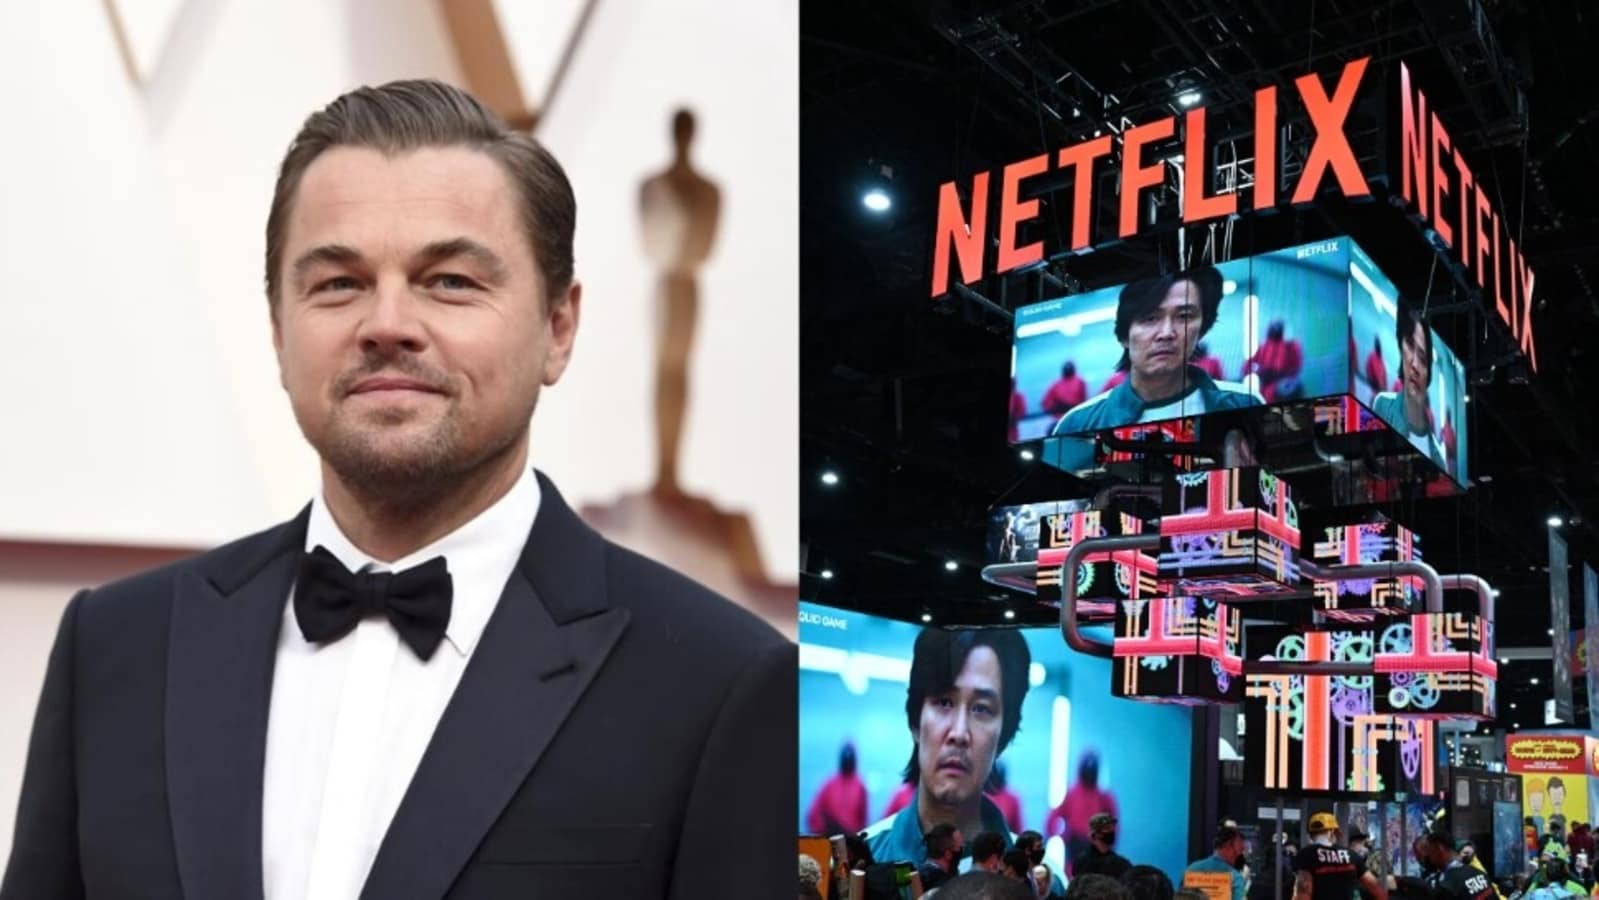 Leonardo DiCaprio to be part of Squid Game? Director Hwang Dong-hyuk says ‘he did say he’s a big fan, so…’